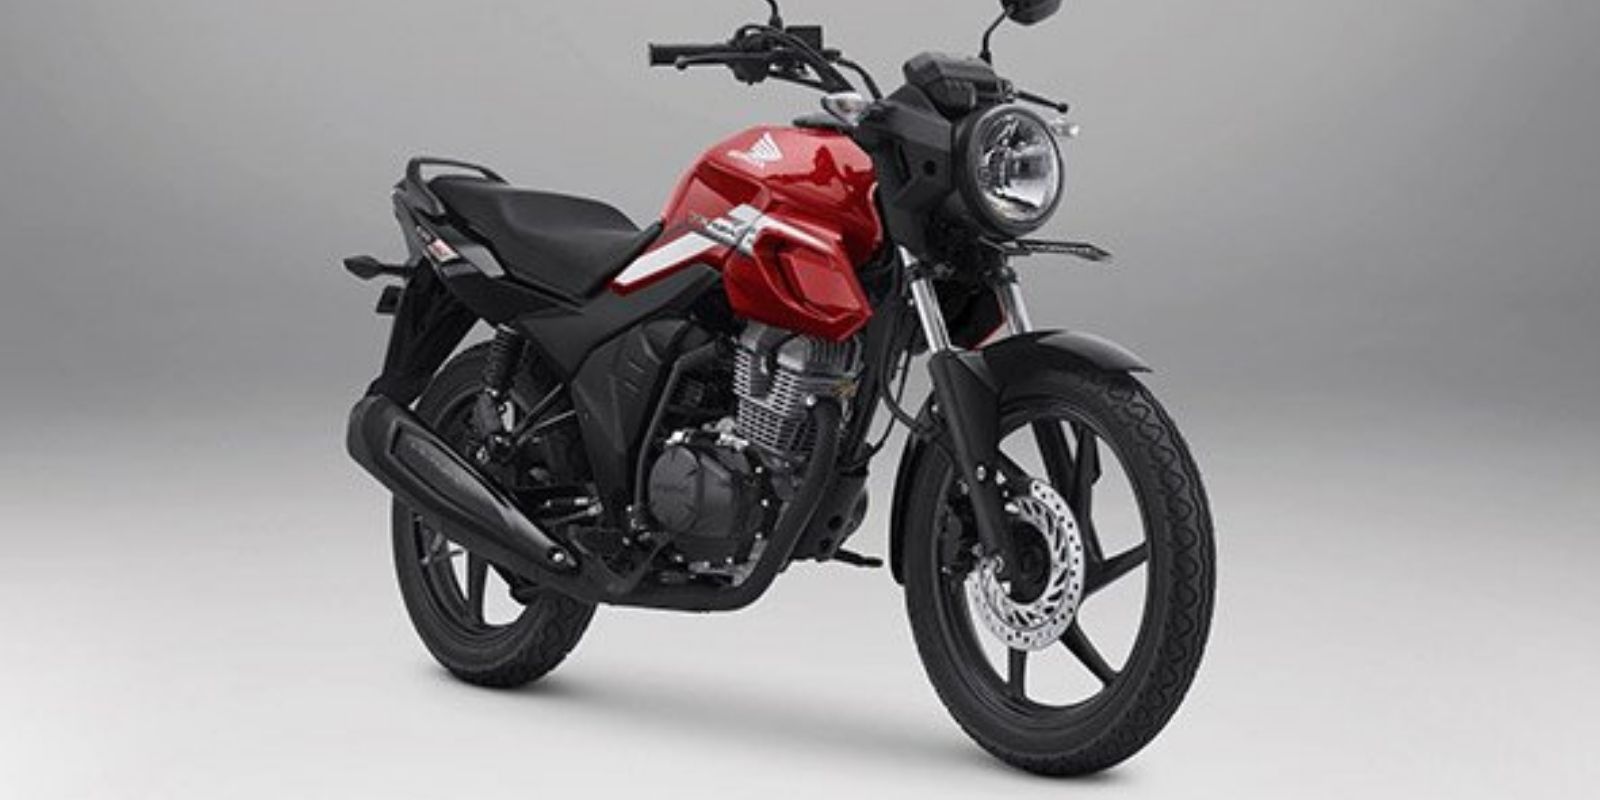 Honda Cb 150 Price In Pakistan. 2021 Honda CB150 Verza – 5 Things You Should Know About It